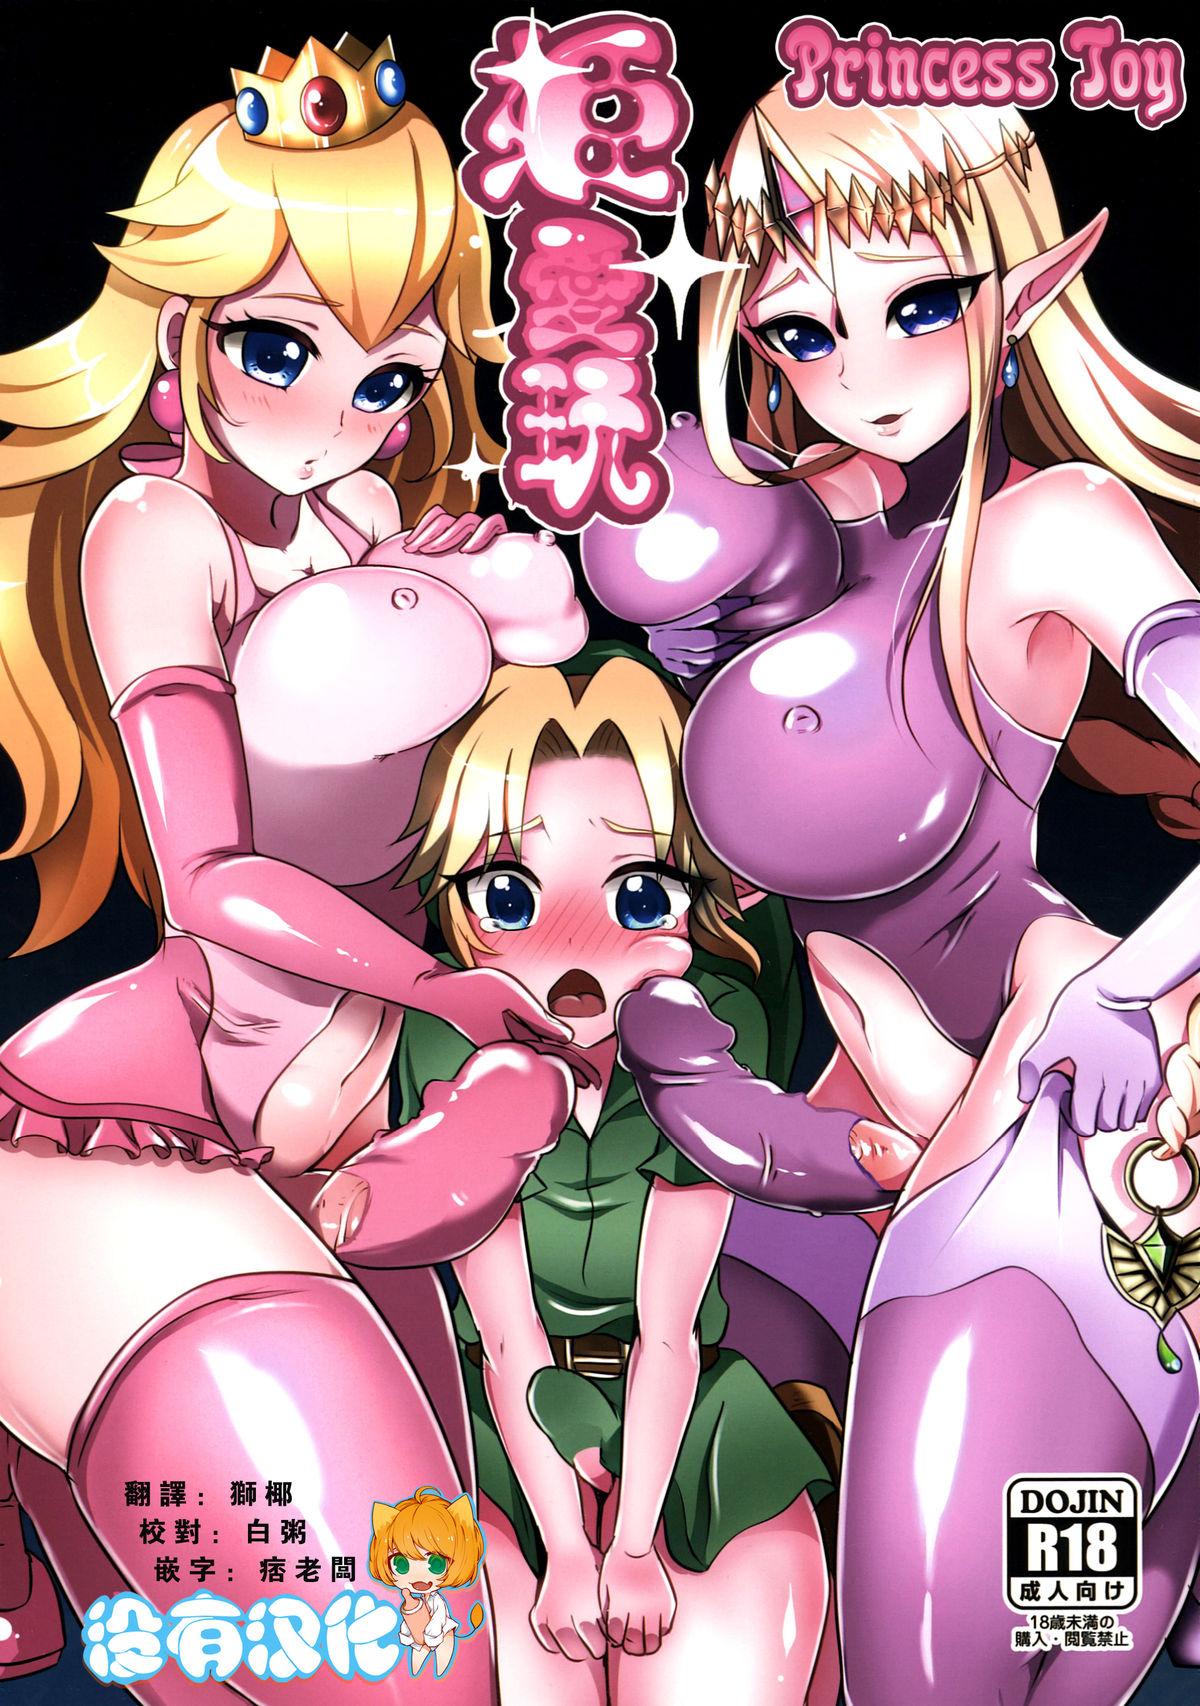 Groupfuck Hime Aigan - The legend of zelda Super mario brothers Milfporn - Picture 1